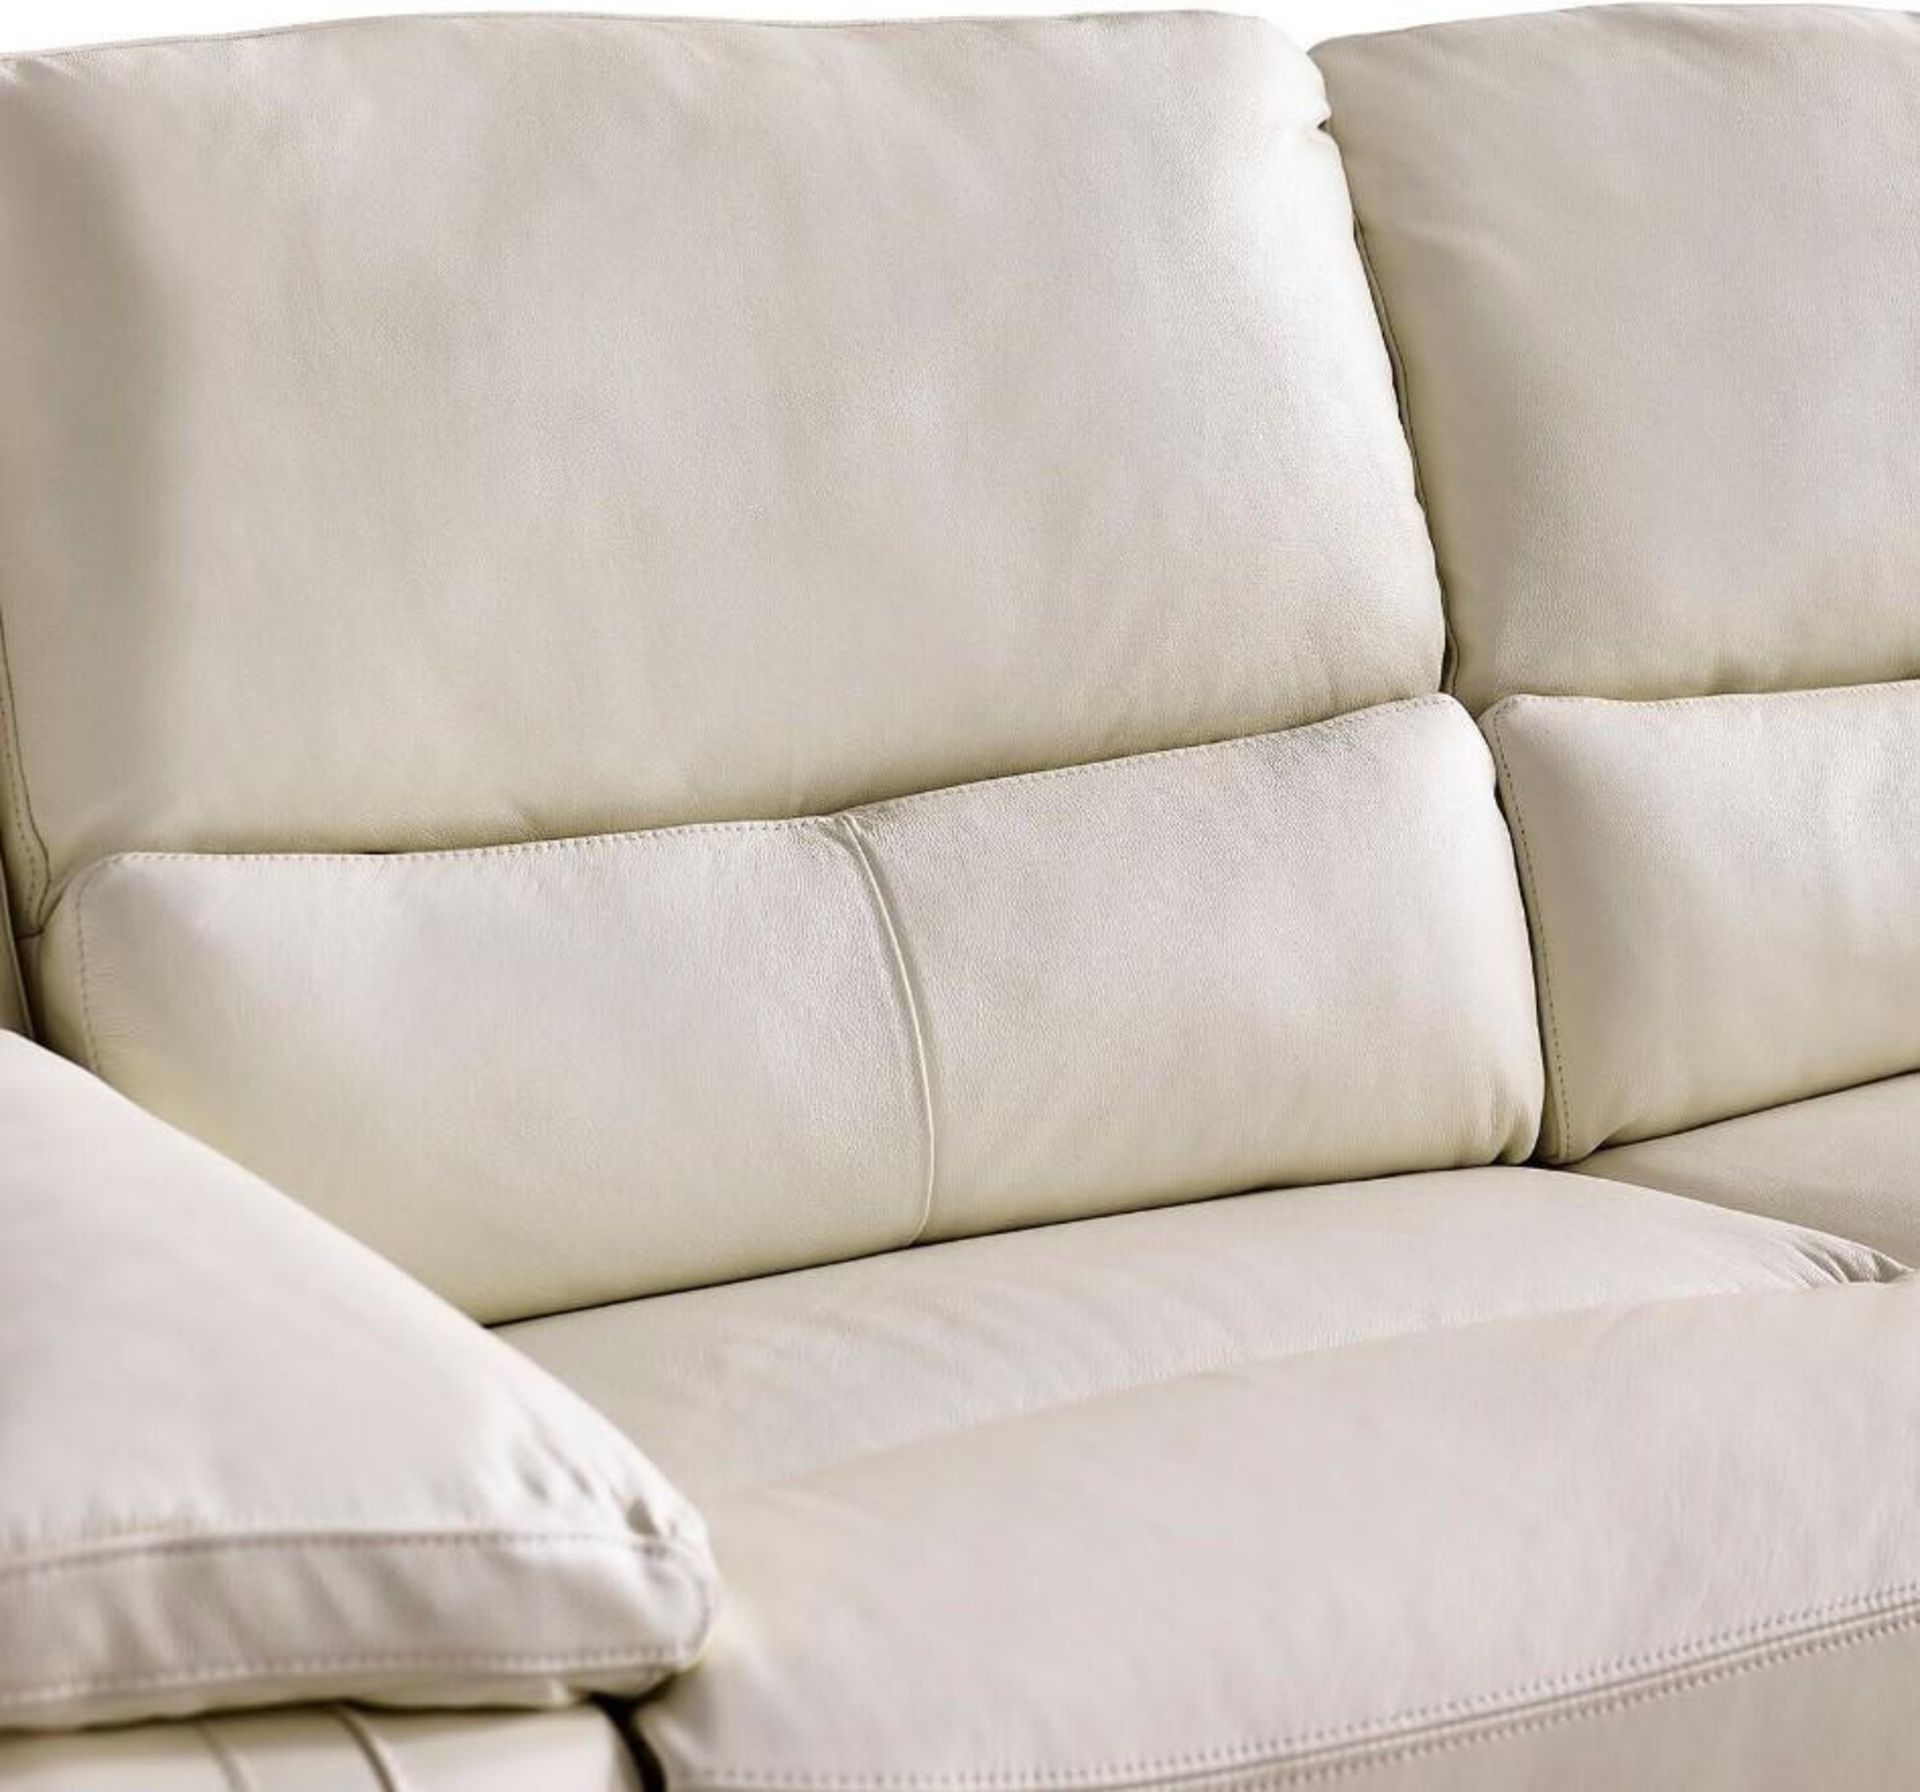 Brand new and boxed SCS Fallon 3 seater electric reclining sofa in Cream. - Image 5 of 7